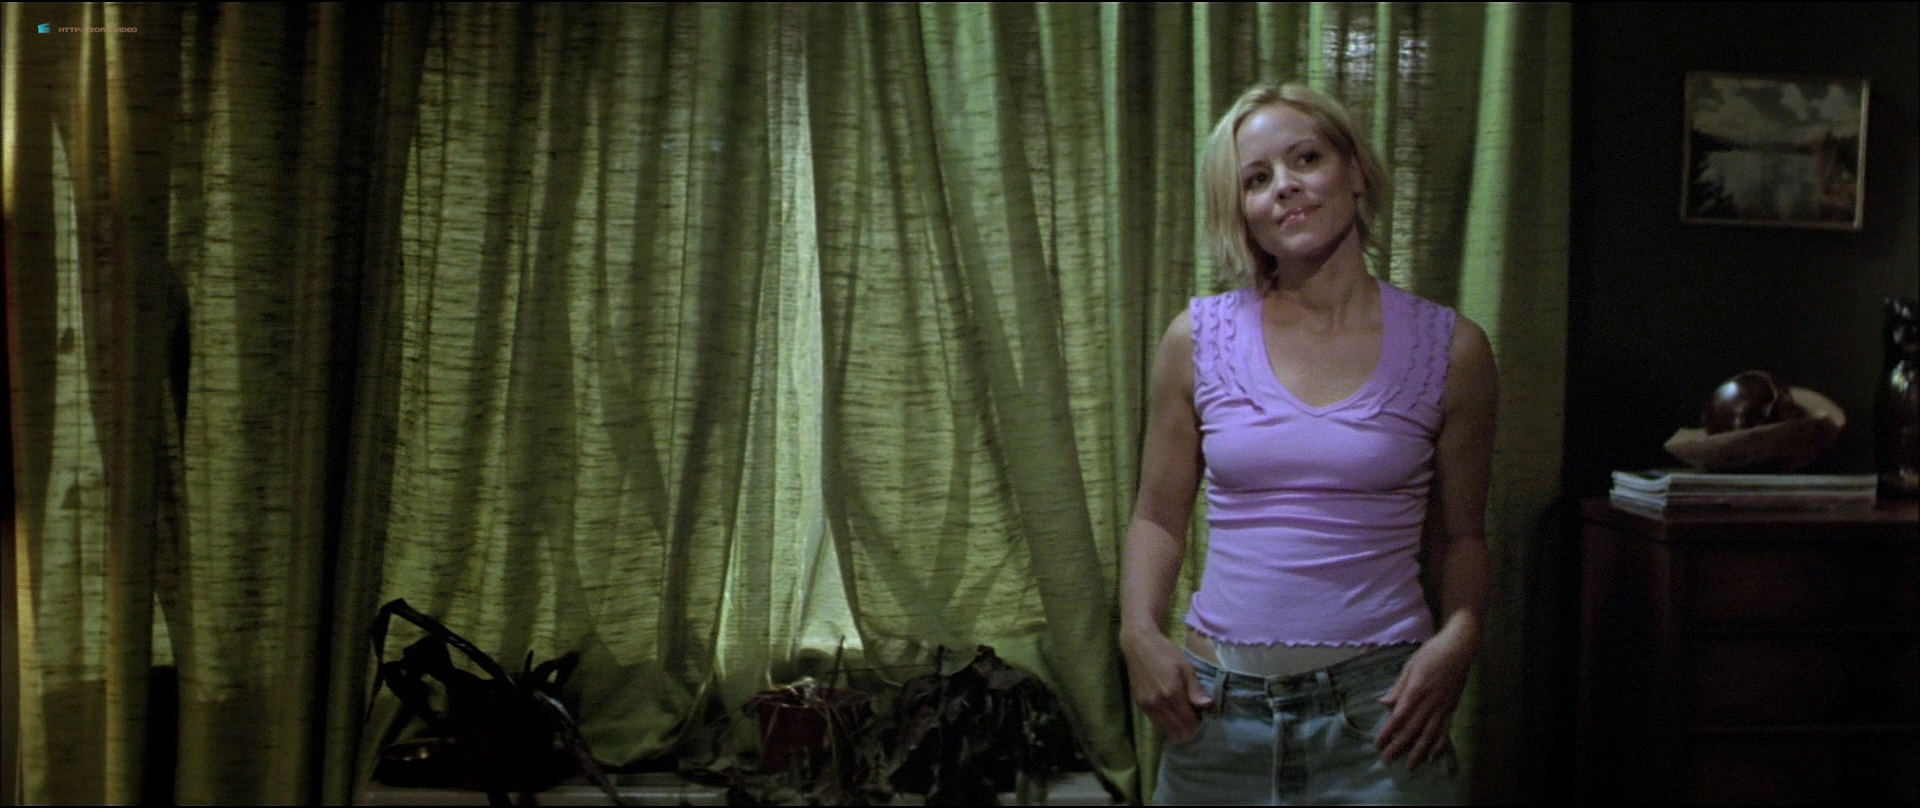 https://www.zorg.video/wp-content/uploads/2017/06/Maria-Bello-nude-topless-butt-bush-and-sex-The-Cooler-2003-HD-1080p-BluRay-001.jpg